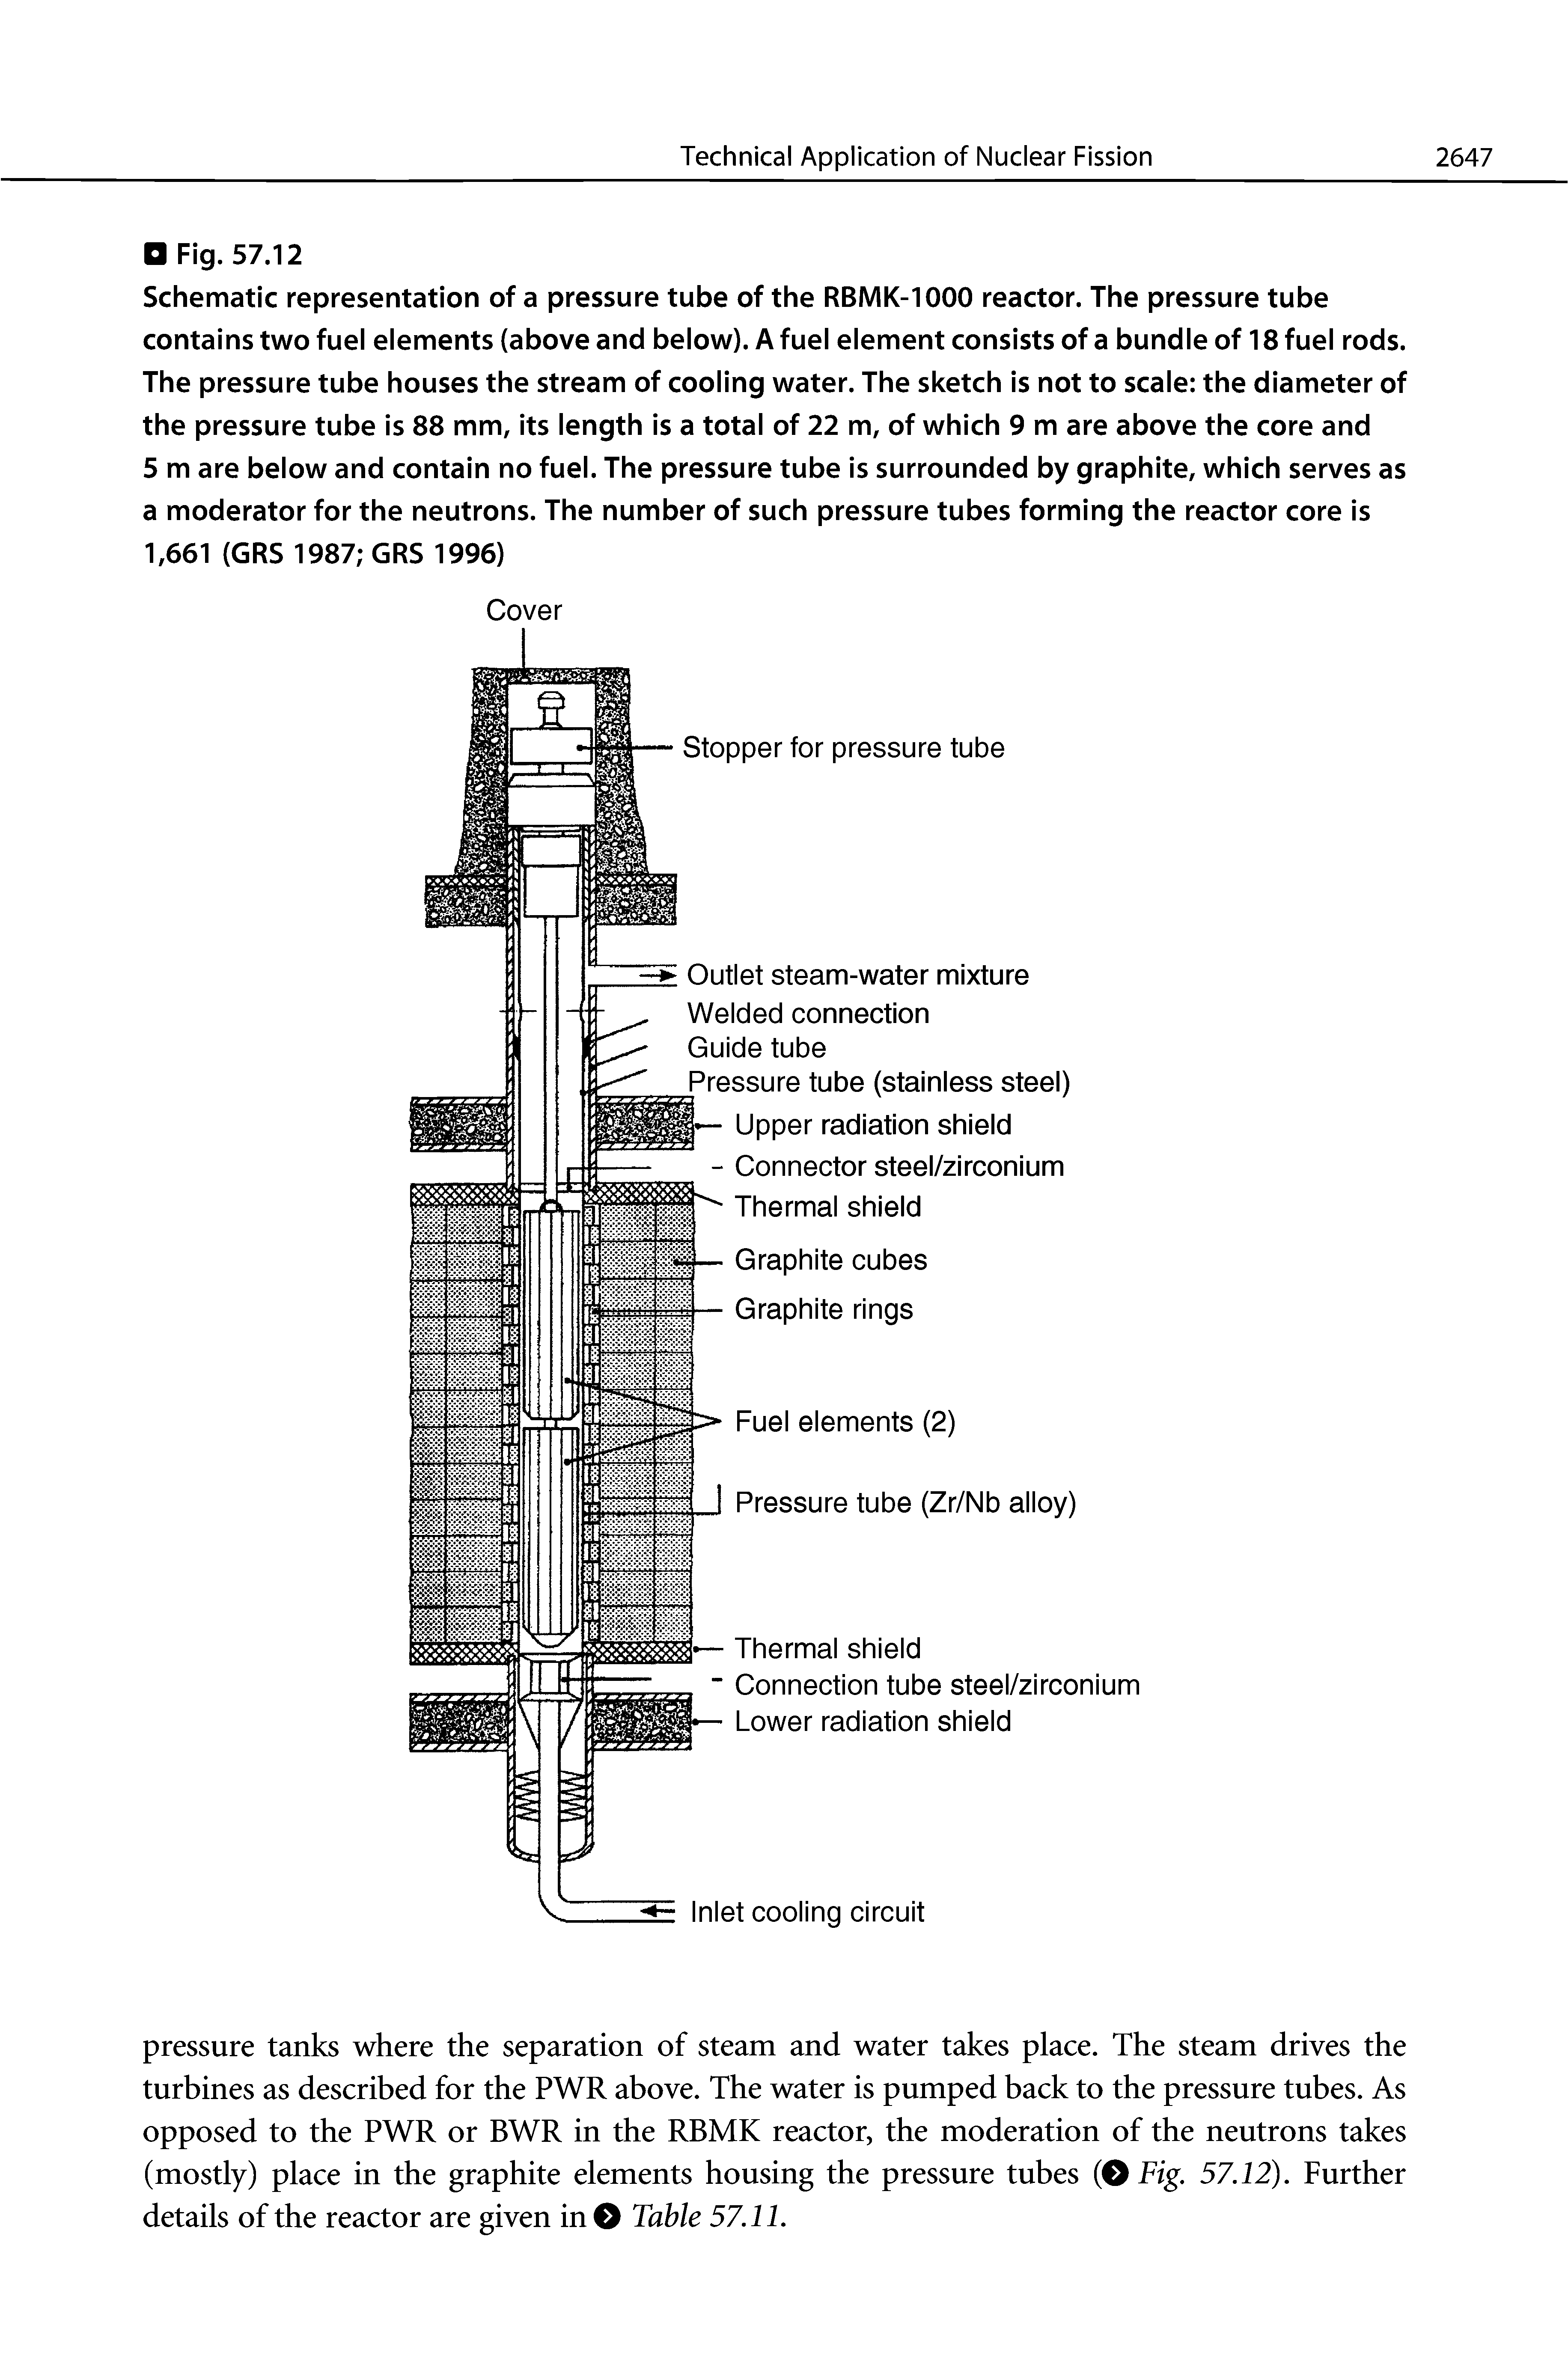 Schematic representation of a pressure tube of the RBMK-1000 reactor. The pressure tube contains two fuel elements (above and below). A fuel element consists of a bundle of 18 fuel rods. The pressure tube houses the stream of cooling water. The sketch is not to scale the diameter of the pressure tube is 88 mm, its length is a total of 22 m, of which 9 m are above the core and 5 m are below and contain no fuel. The pressure tube is surrounded by graphite, which serves as a moderator for the neutrons. The number of such pressure tubes forming the reactor core is 1,661 (GRS 1987 GRS 1996)...